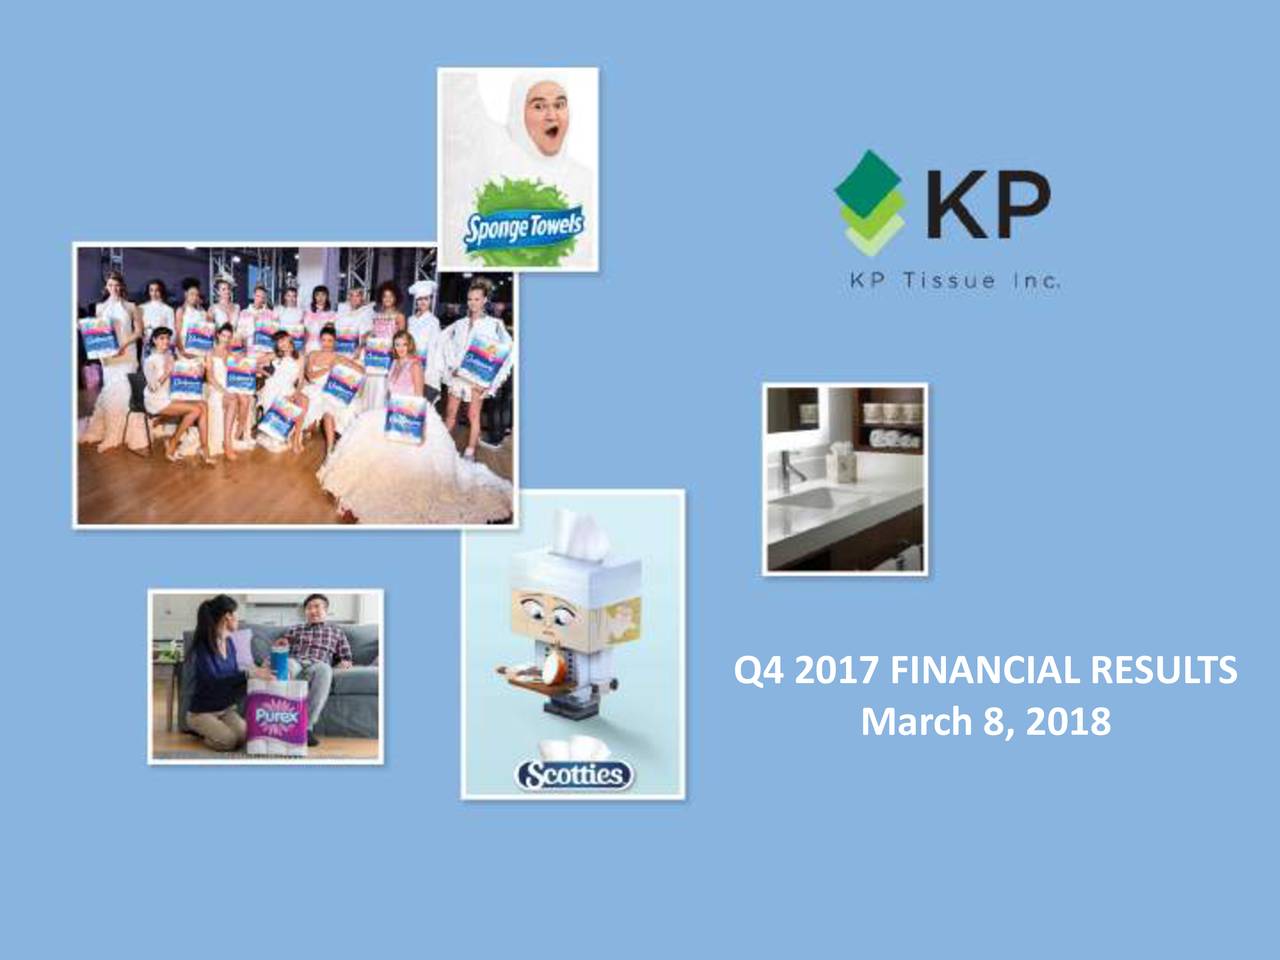 Q4 2017 FINANCIAL RESULTS